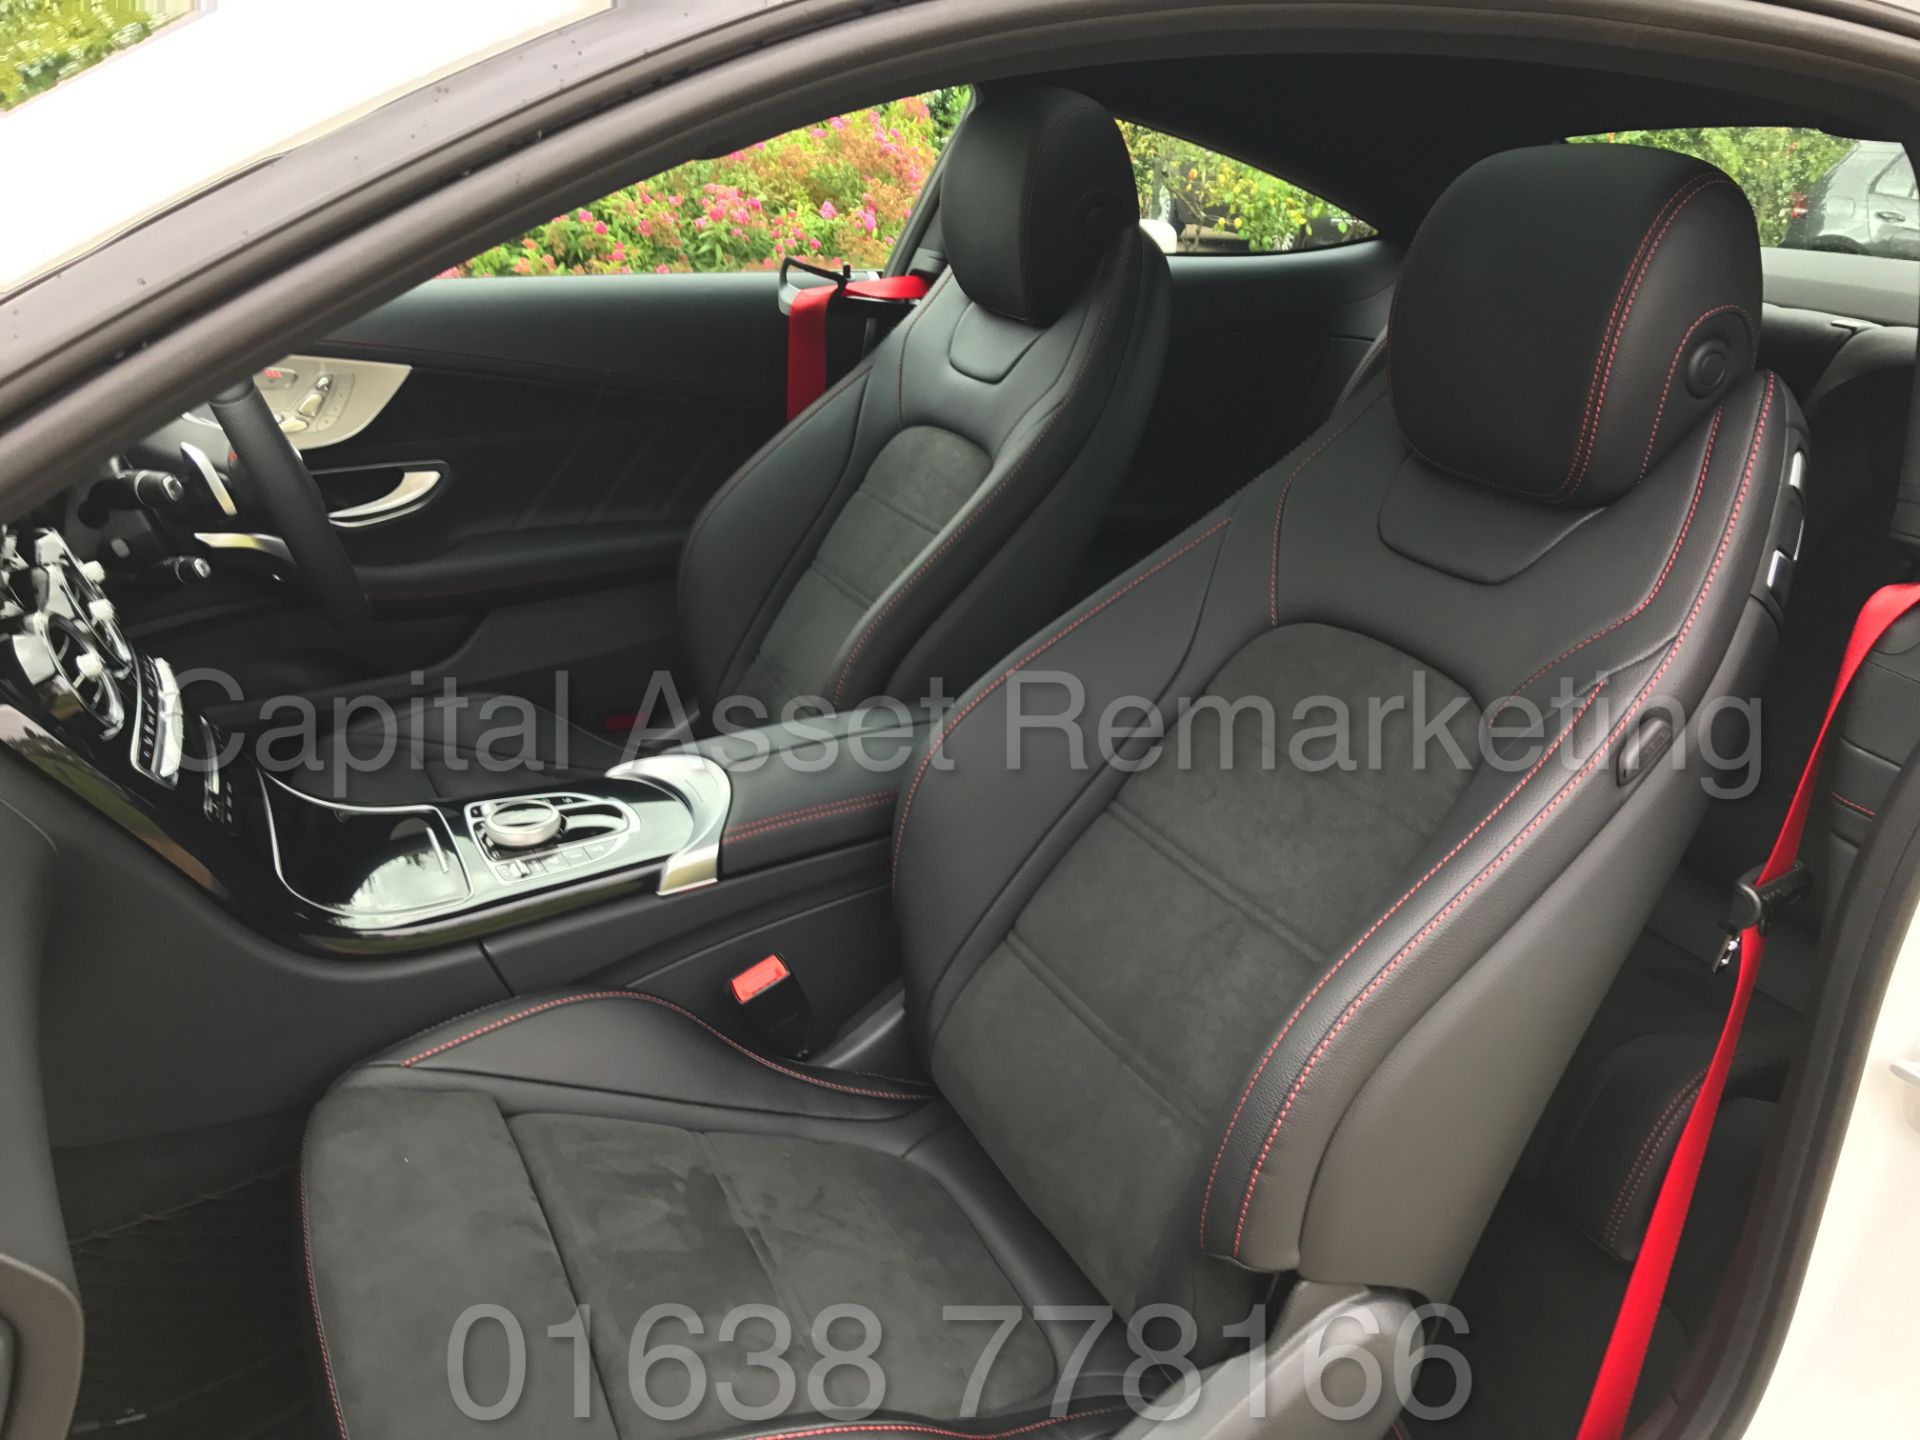 MEREDES-BENZ C43 AMG PREMIUM '4 MATIC' COUPE (2017) '9-G AUTO - LEATHER - SAT NAV' **FULLY LOADED** - Image 30 of 57